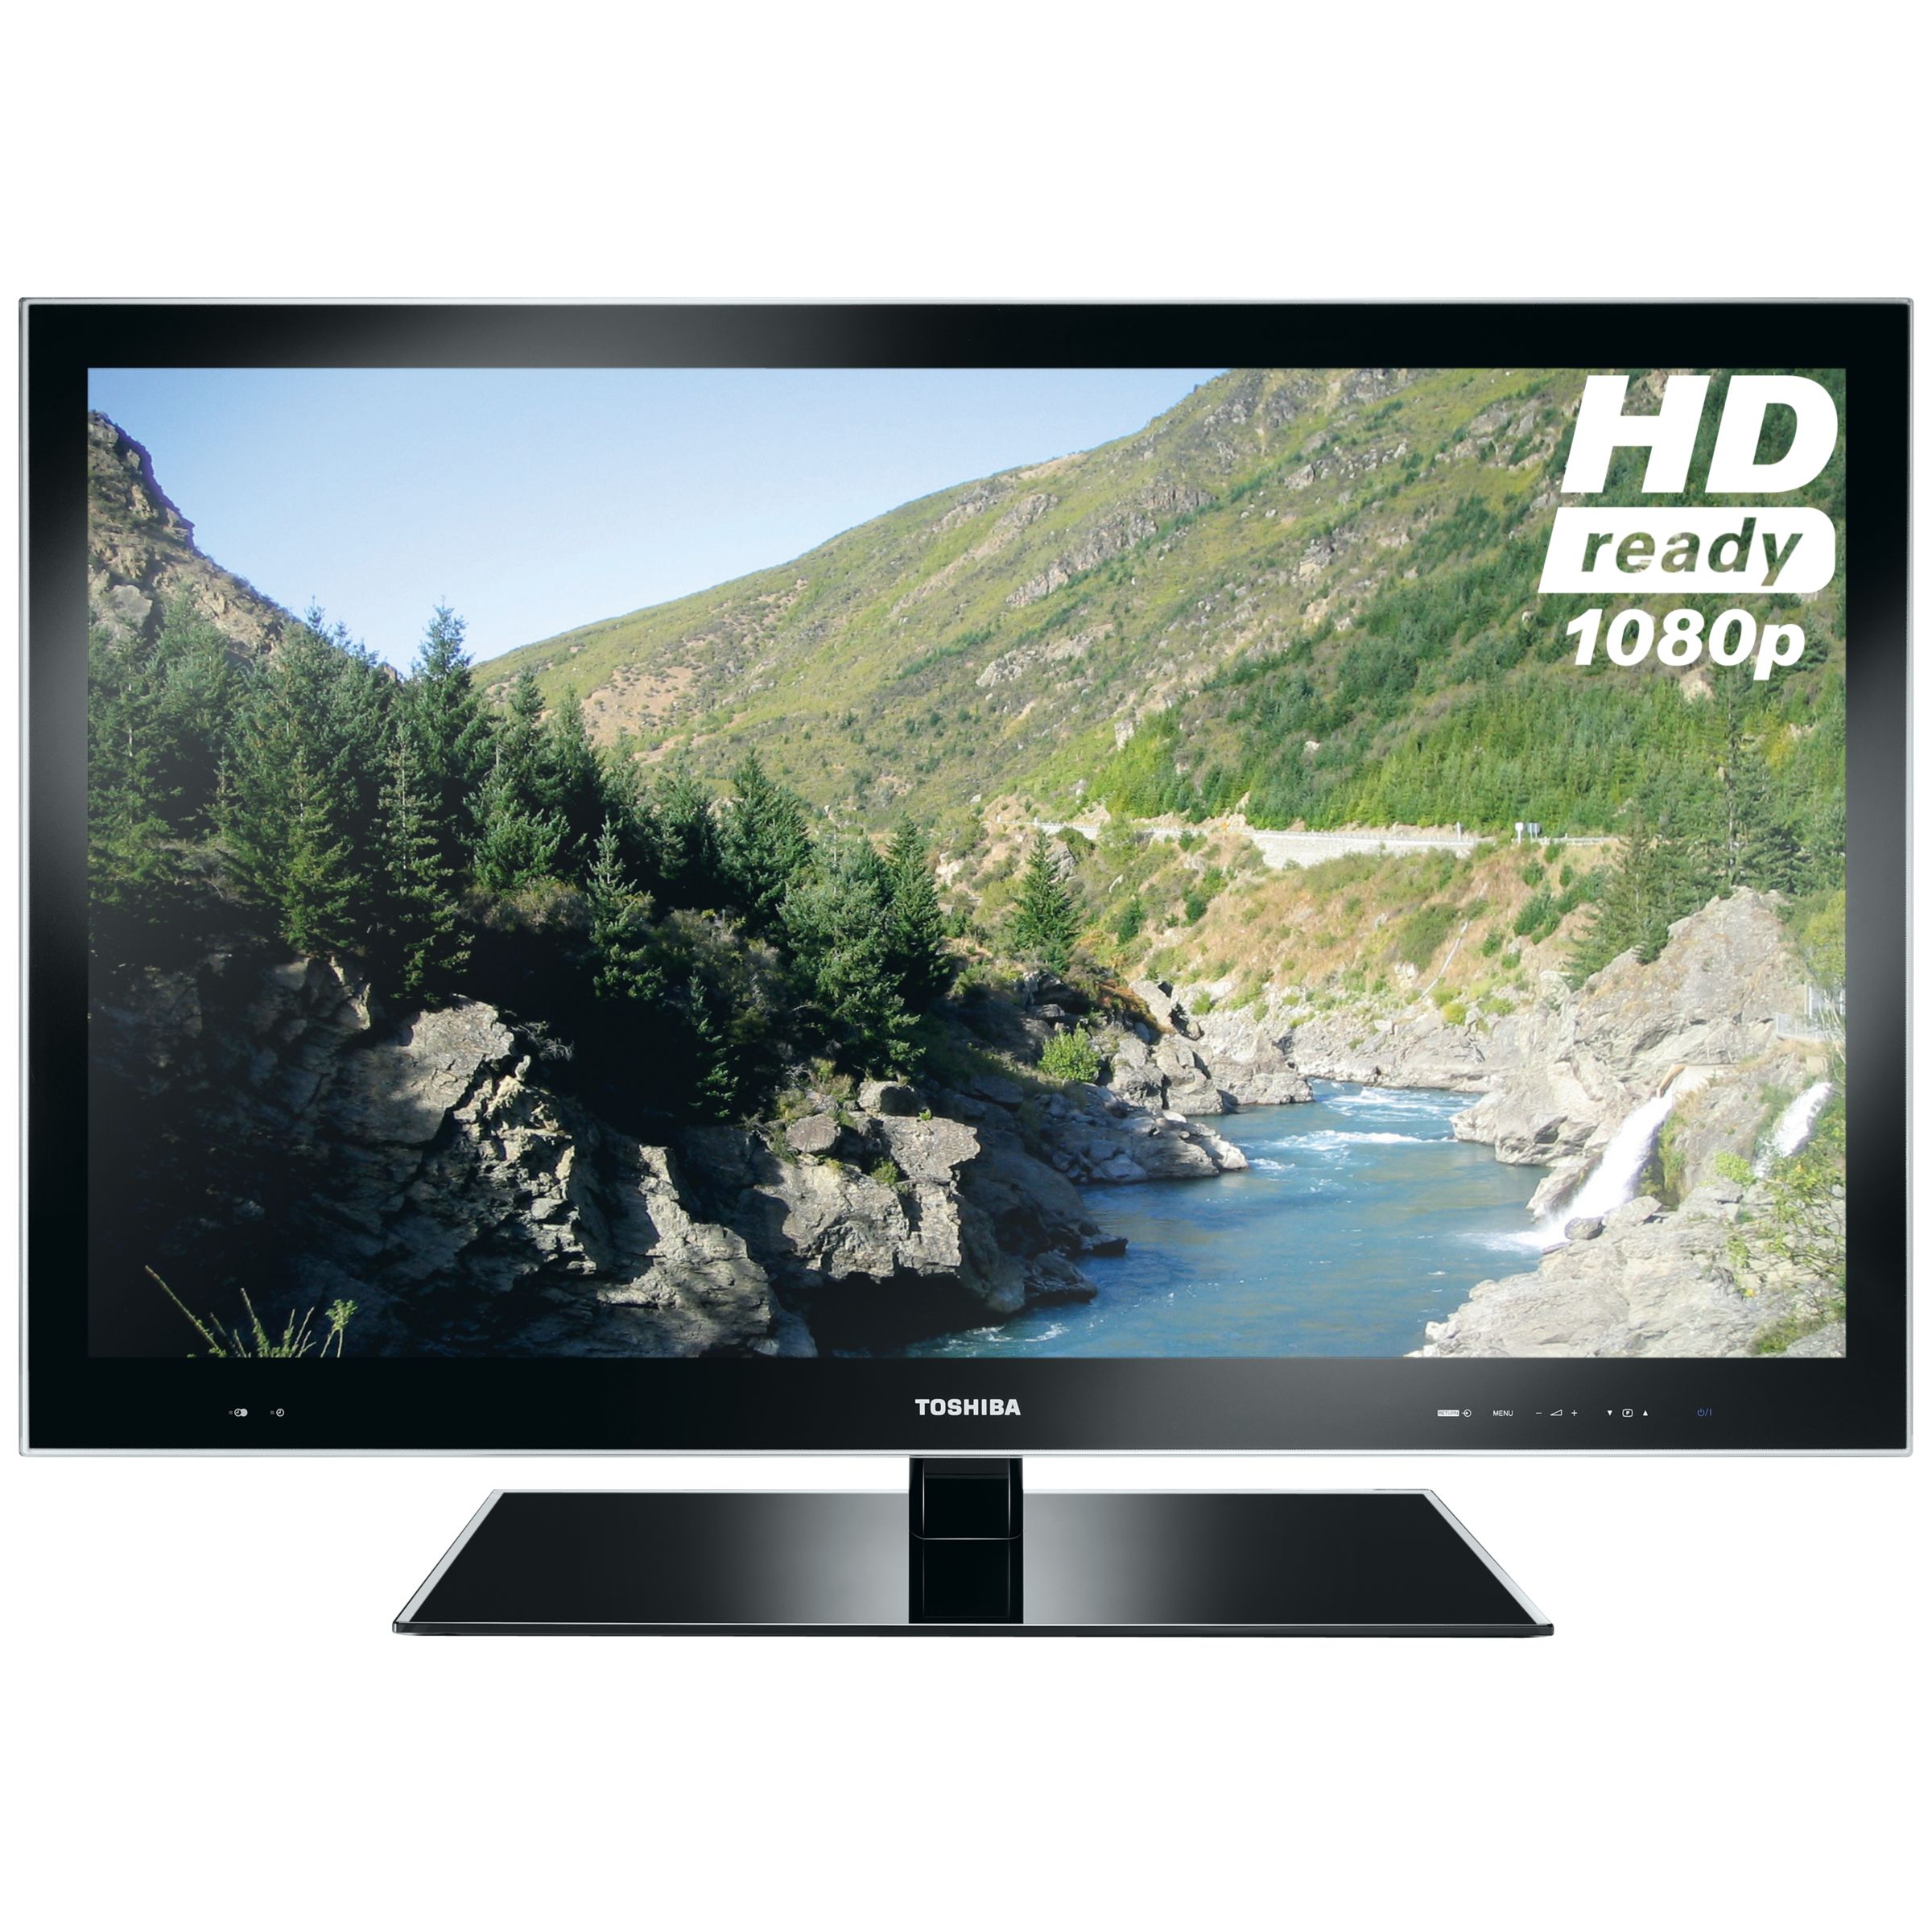 Toshiba Regza 40VL758 LED HD 1080p TV, 40", Freeview HD with FREE Blu-ray Player at JohnLewis